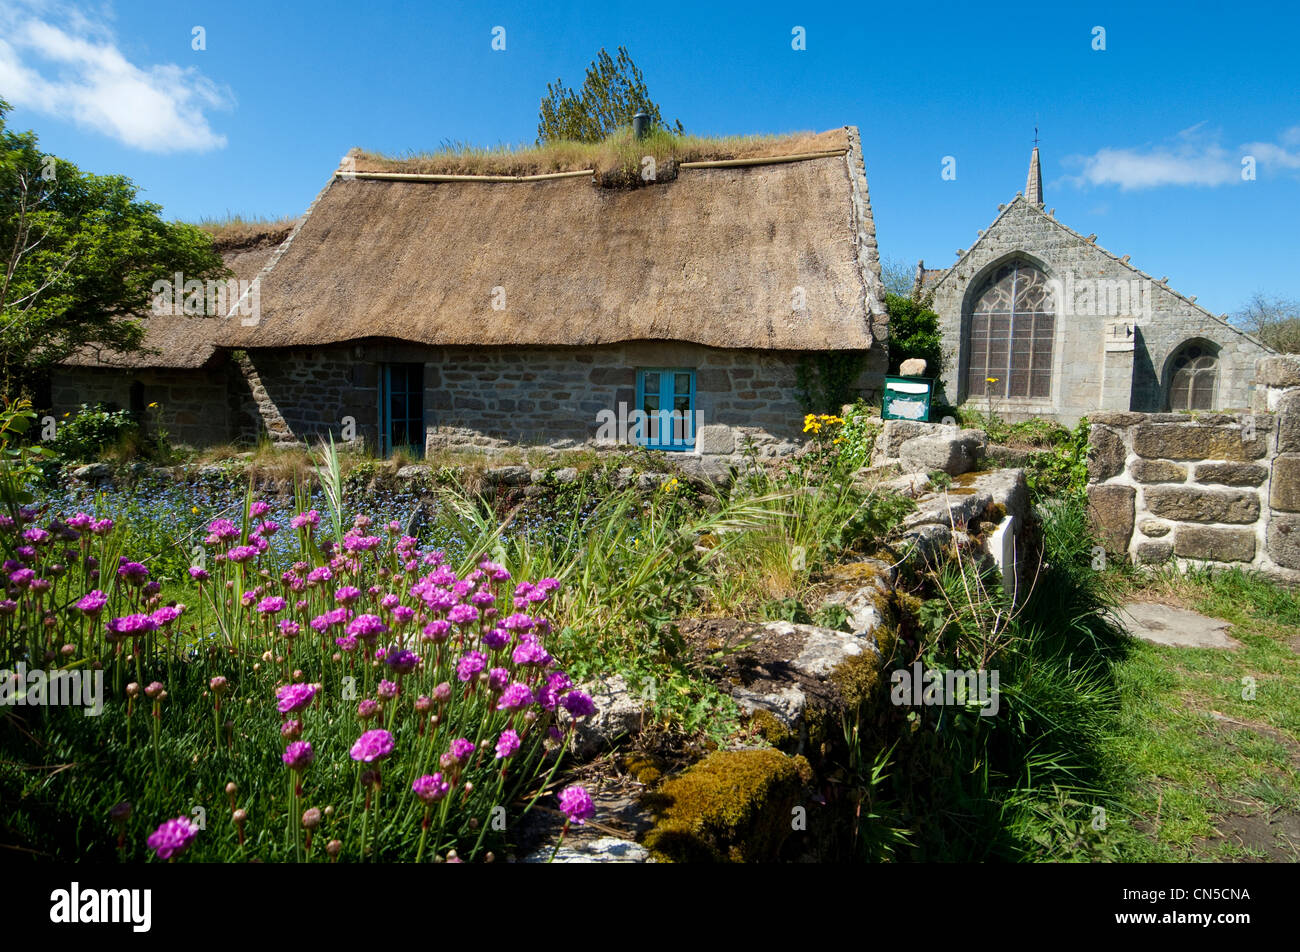 France, Finistere, Pays Bigouden, La Madeleine, traditional houses with thatched roofs Stock Photo